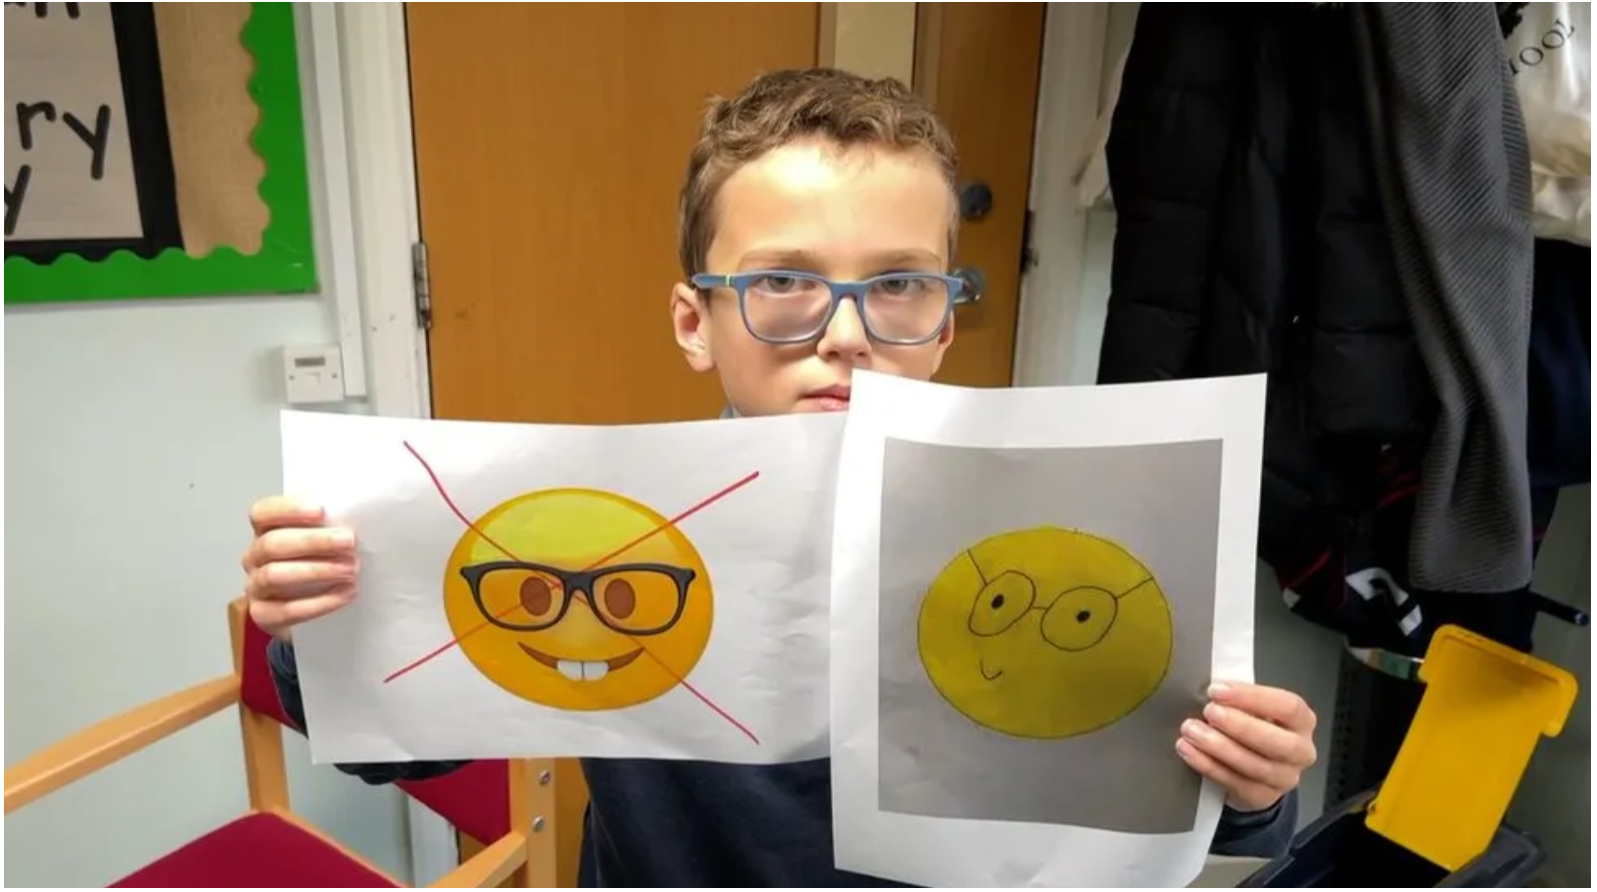 An image of a young boy with Apple's nerd face emoji design next to his own redesign